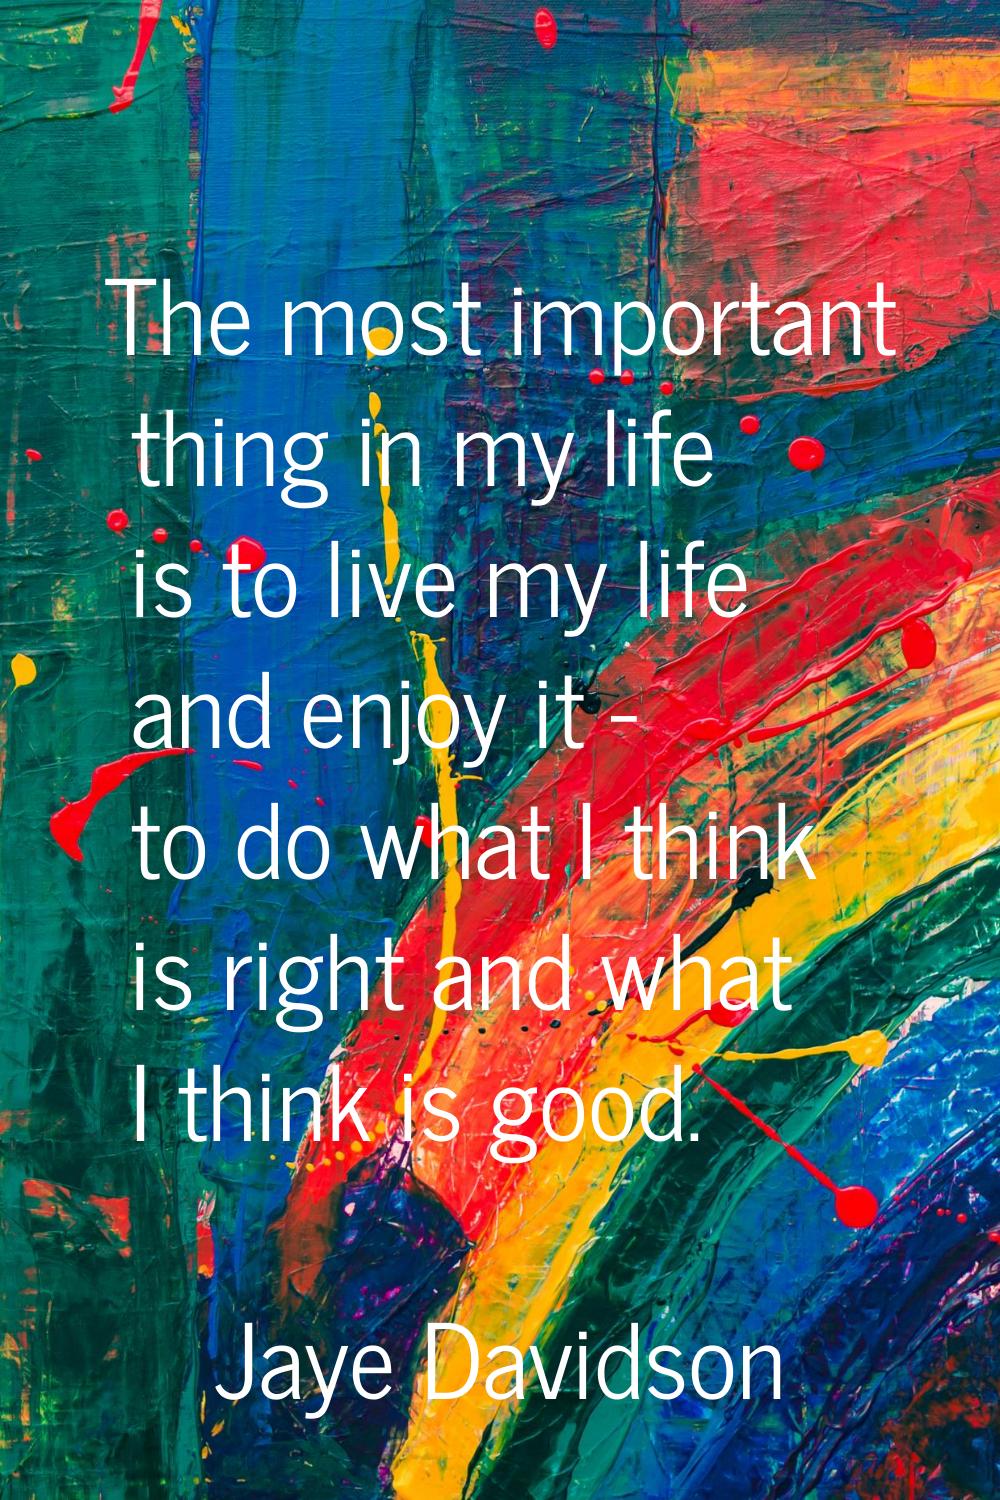 The most important thing in my life is to live my life and enjoy it - to do what I think is right a